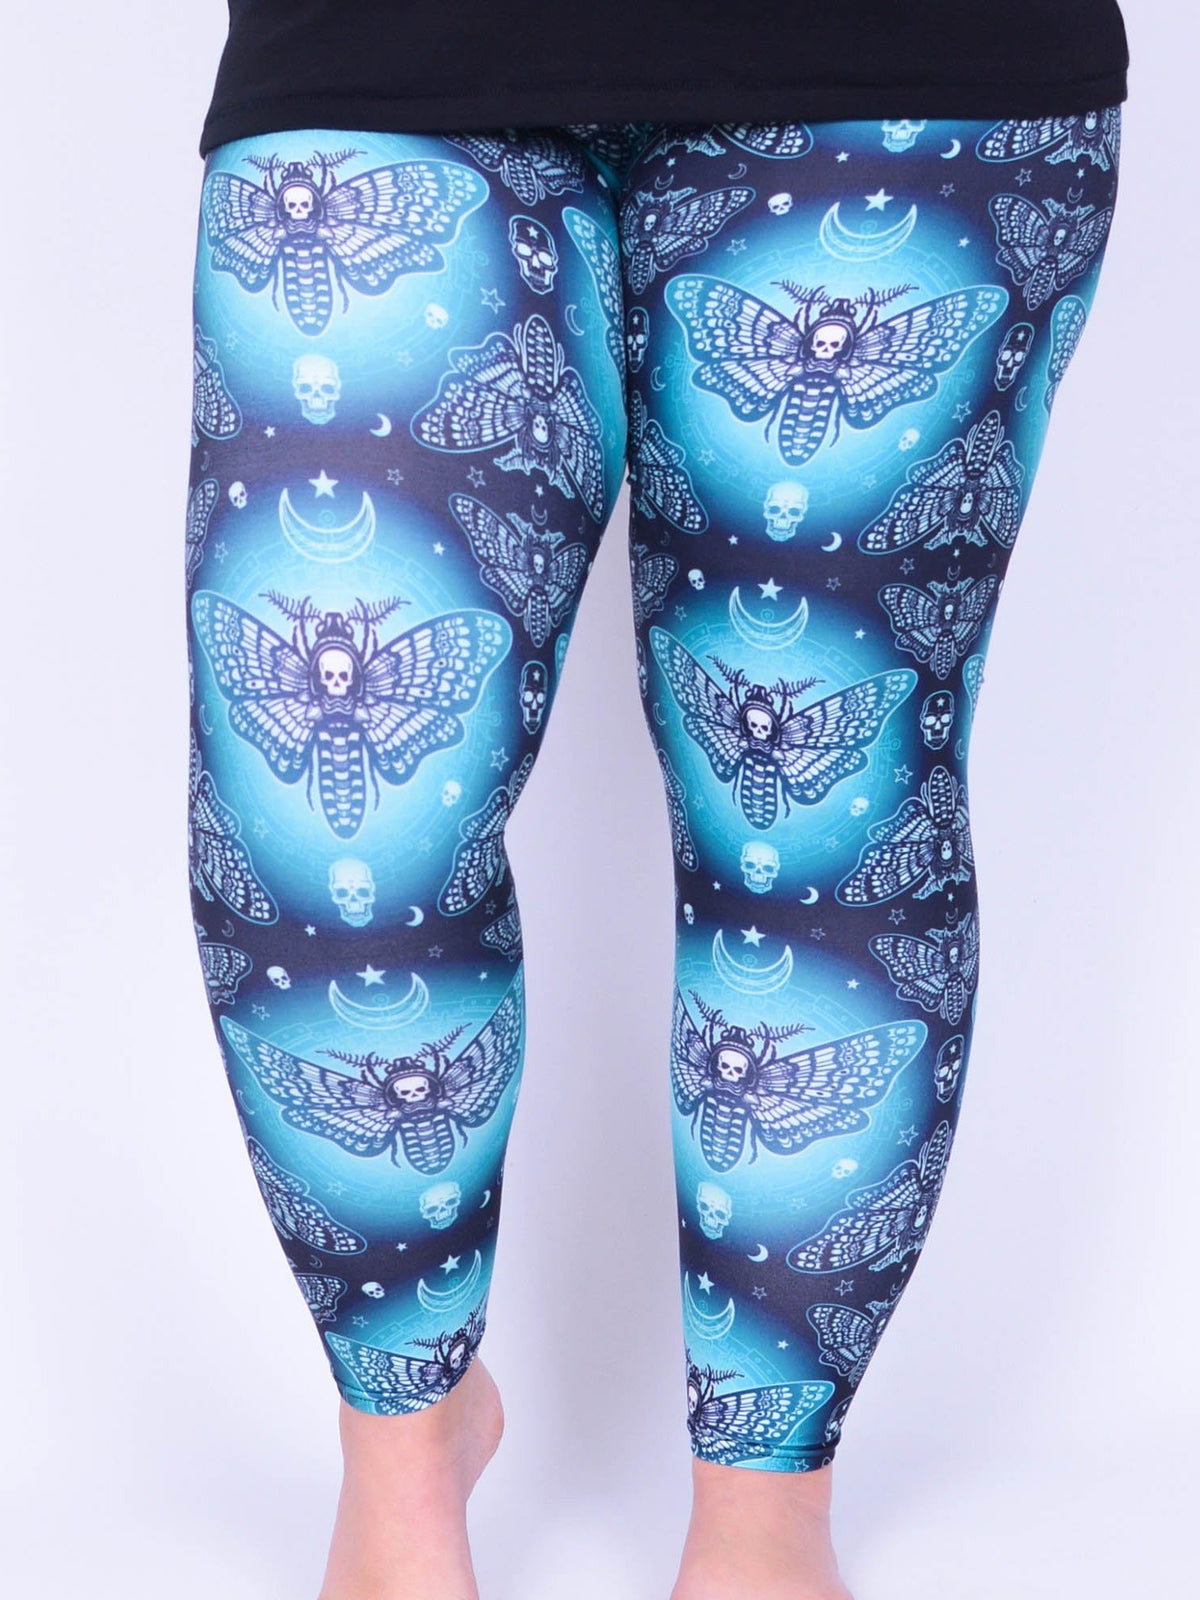 Leggings - Dragonfly Skulls - L19, Trousers, Pure Plus Clothing, Lagenlook Clothing, Plus Size Fashion, Over 50 Fashion